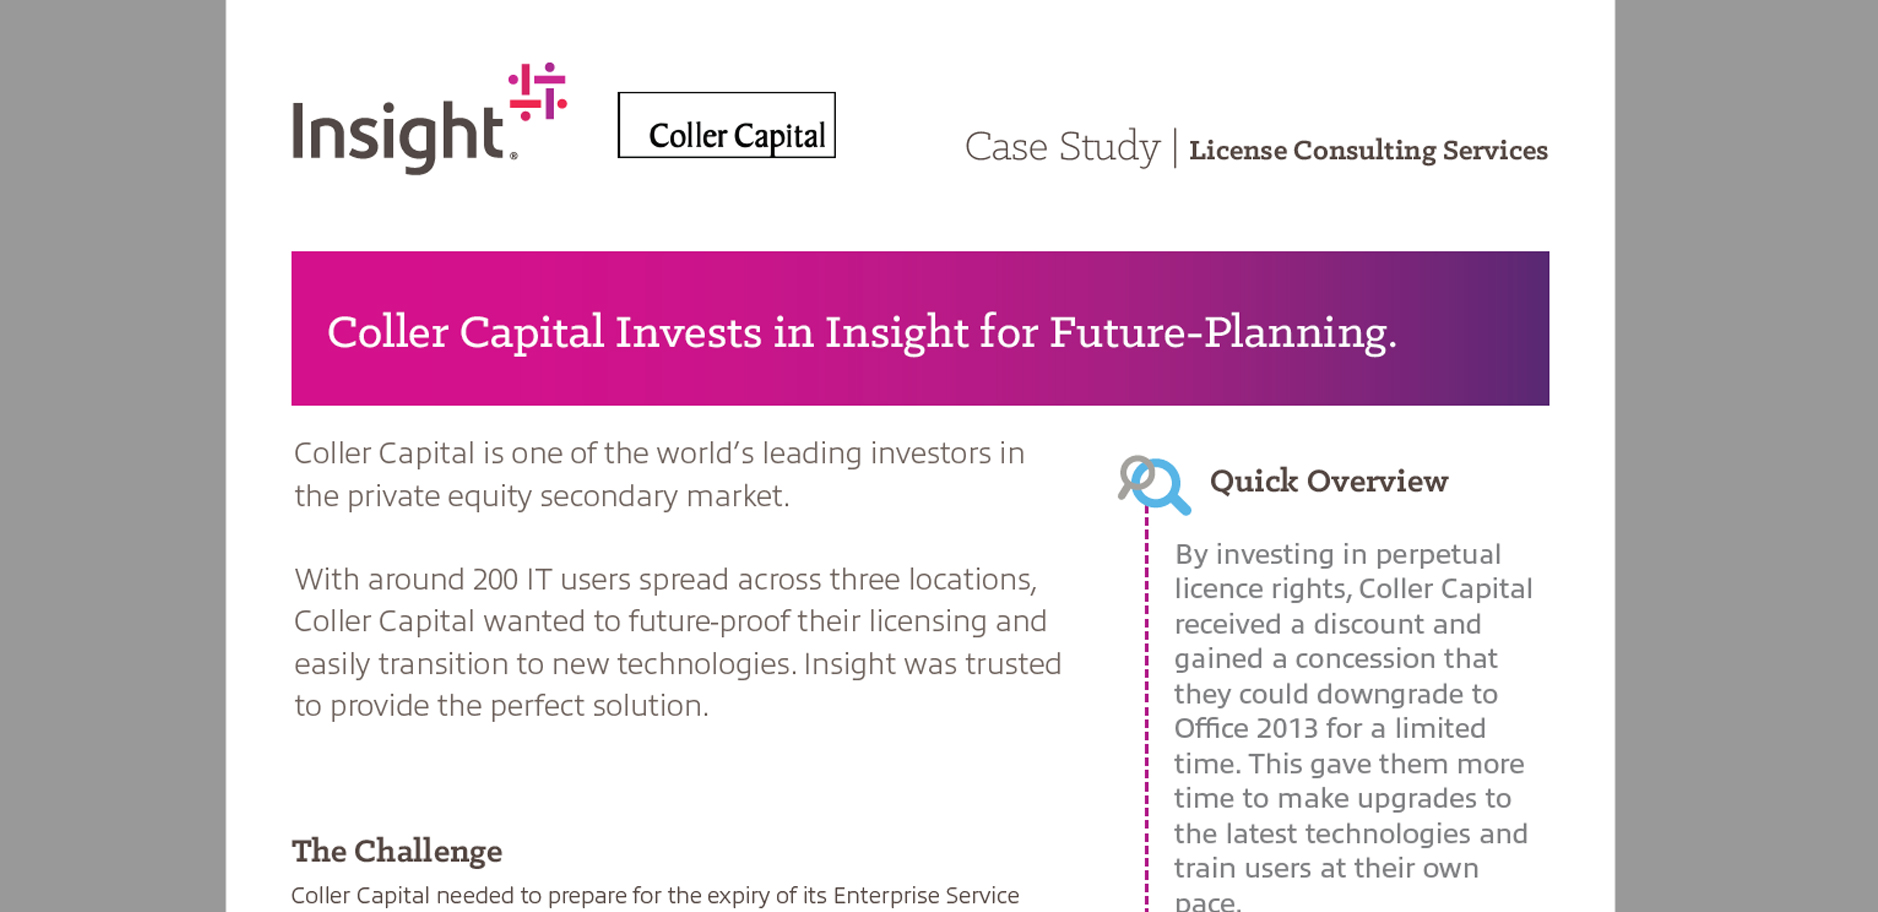 Article Coller Capital: Invests in Insight for Future-Planning Image